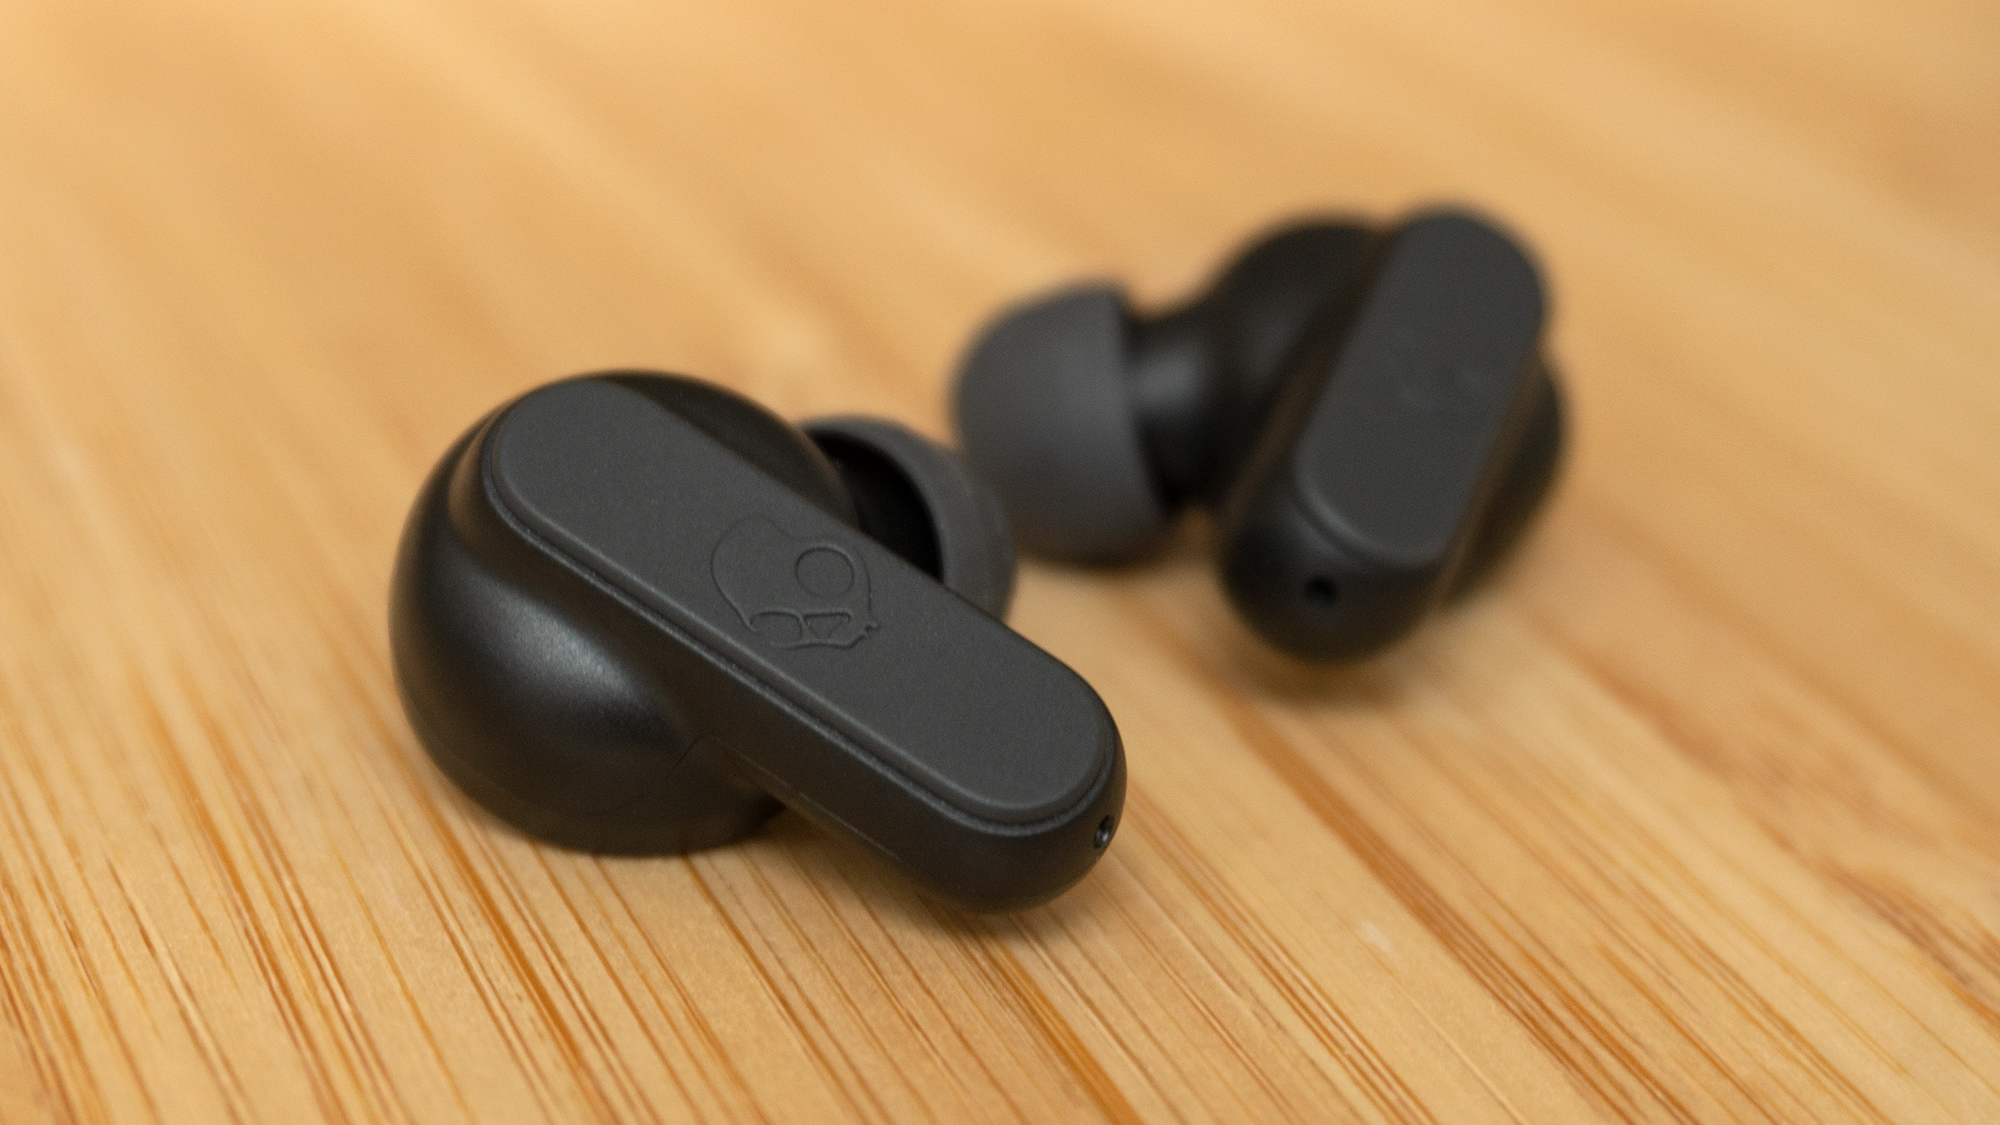 Each earbud has a physical button (you press on the tiny Skullcandy skull logo) that can be pressed in various ways to access shortcuts, but be prepared to study the included manual, or just keep your phone in hand all the time. (Photo: Andrew Liszewski/Gizmodo)